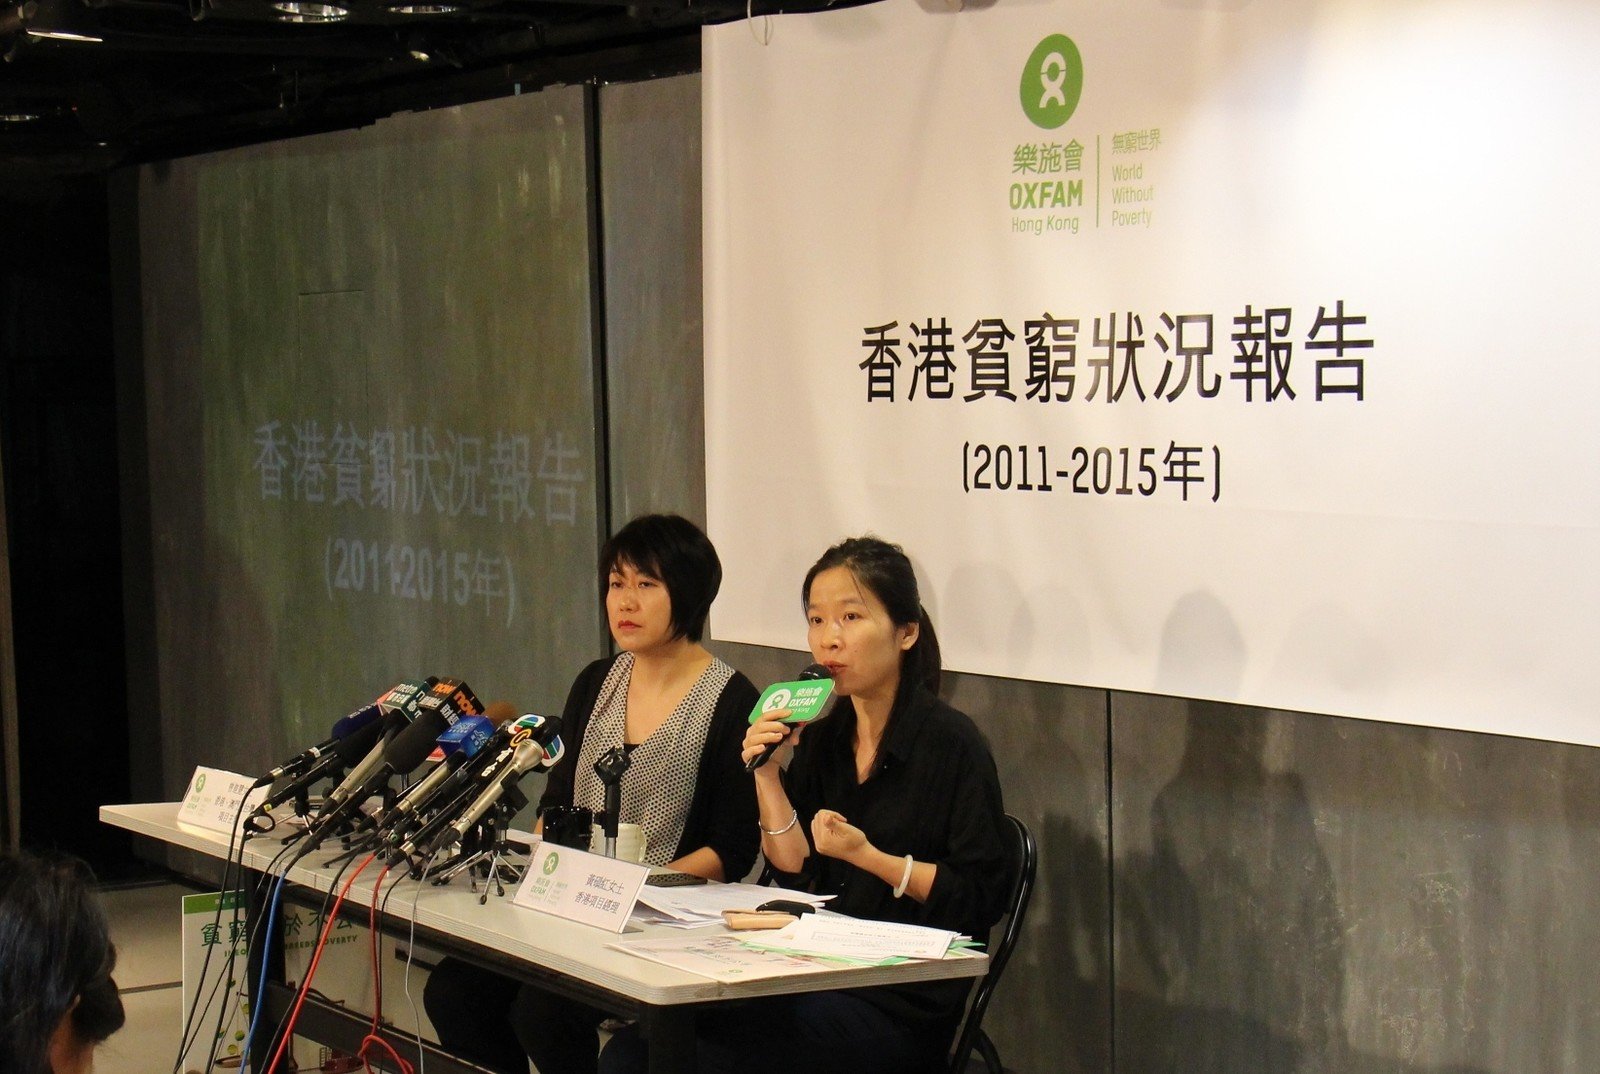 Wong Shek-hung, Oxfam’s Hong Kong Programme Manager (right), and Kalina Tsang, Head of Oxfam’s Hong Kong, Macau, Taiwan Programme (left), shared Oxfam’s latest report, which revealed that local wealth inequality has worsened as the richest earn 29 times more than poorest.